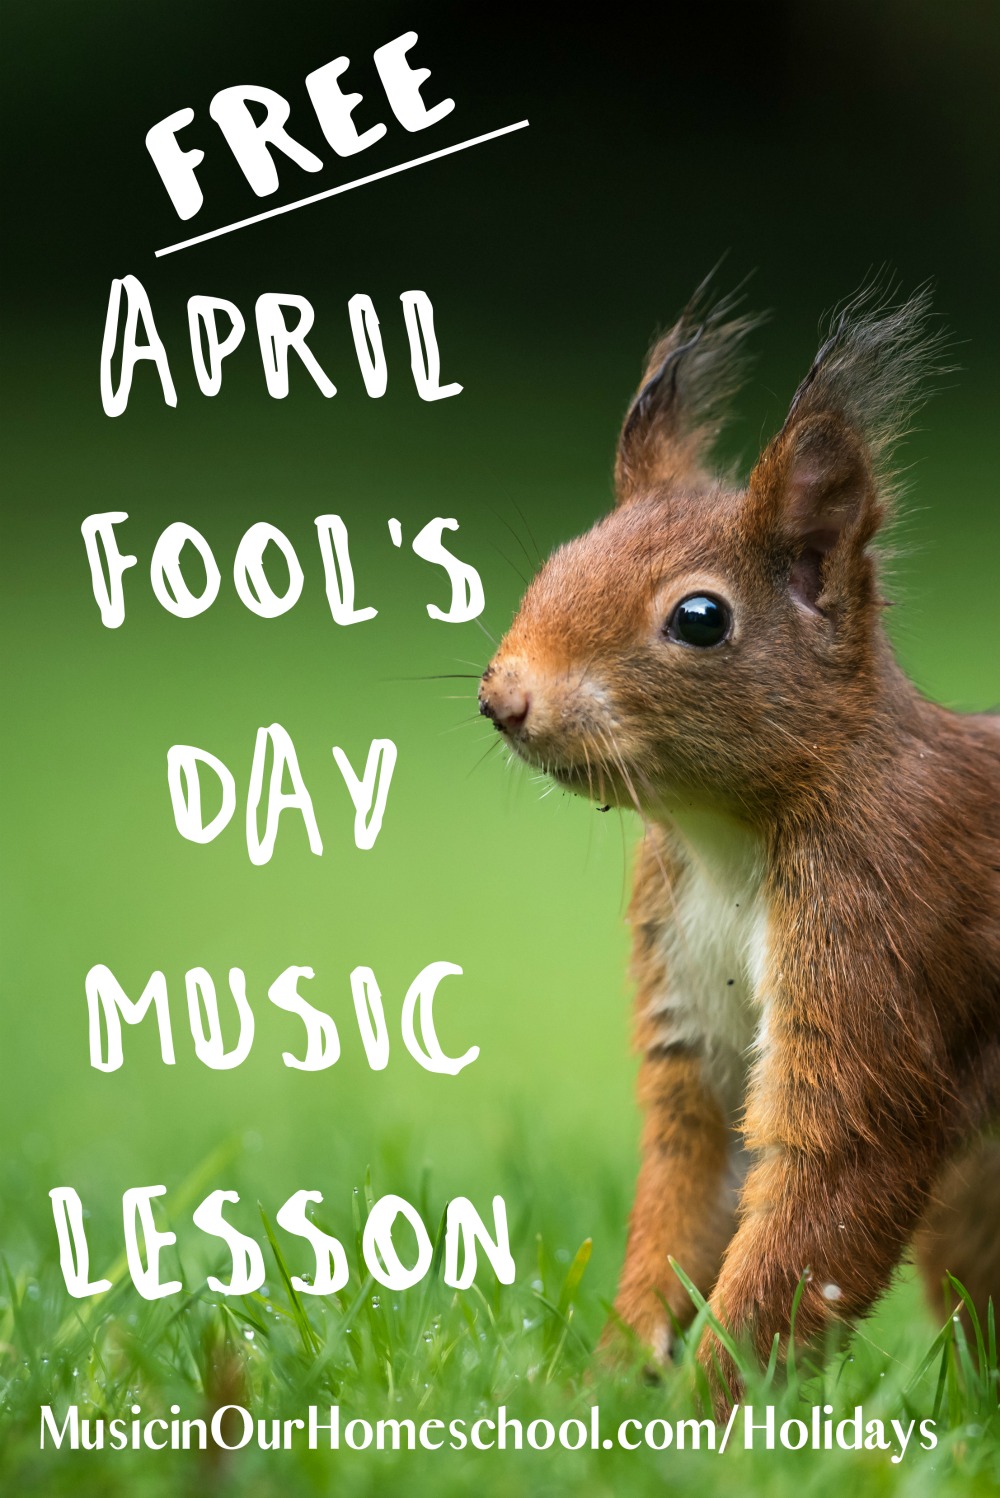 Get a free April Fools Day Music Lesson here as part of the online course "Music Lessons for Holidays & Special Days" from Learn.MusicinOurHomeschool.com #musiclesson #elementarymusiclesson #aprilfoolsday #musicinourhomeschool